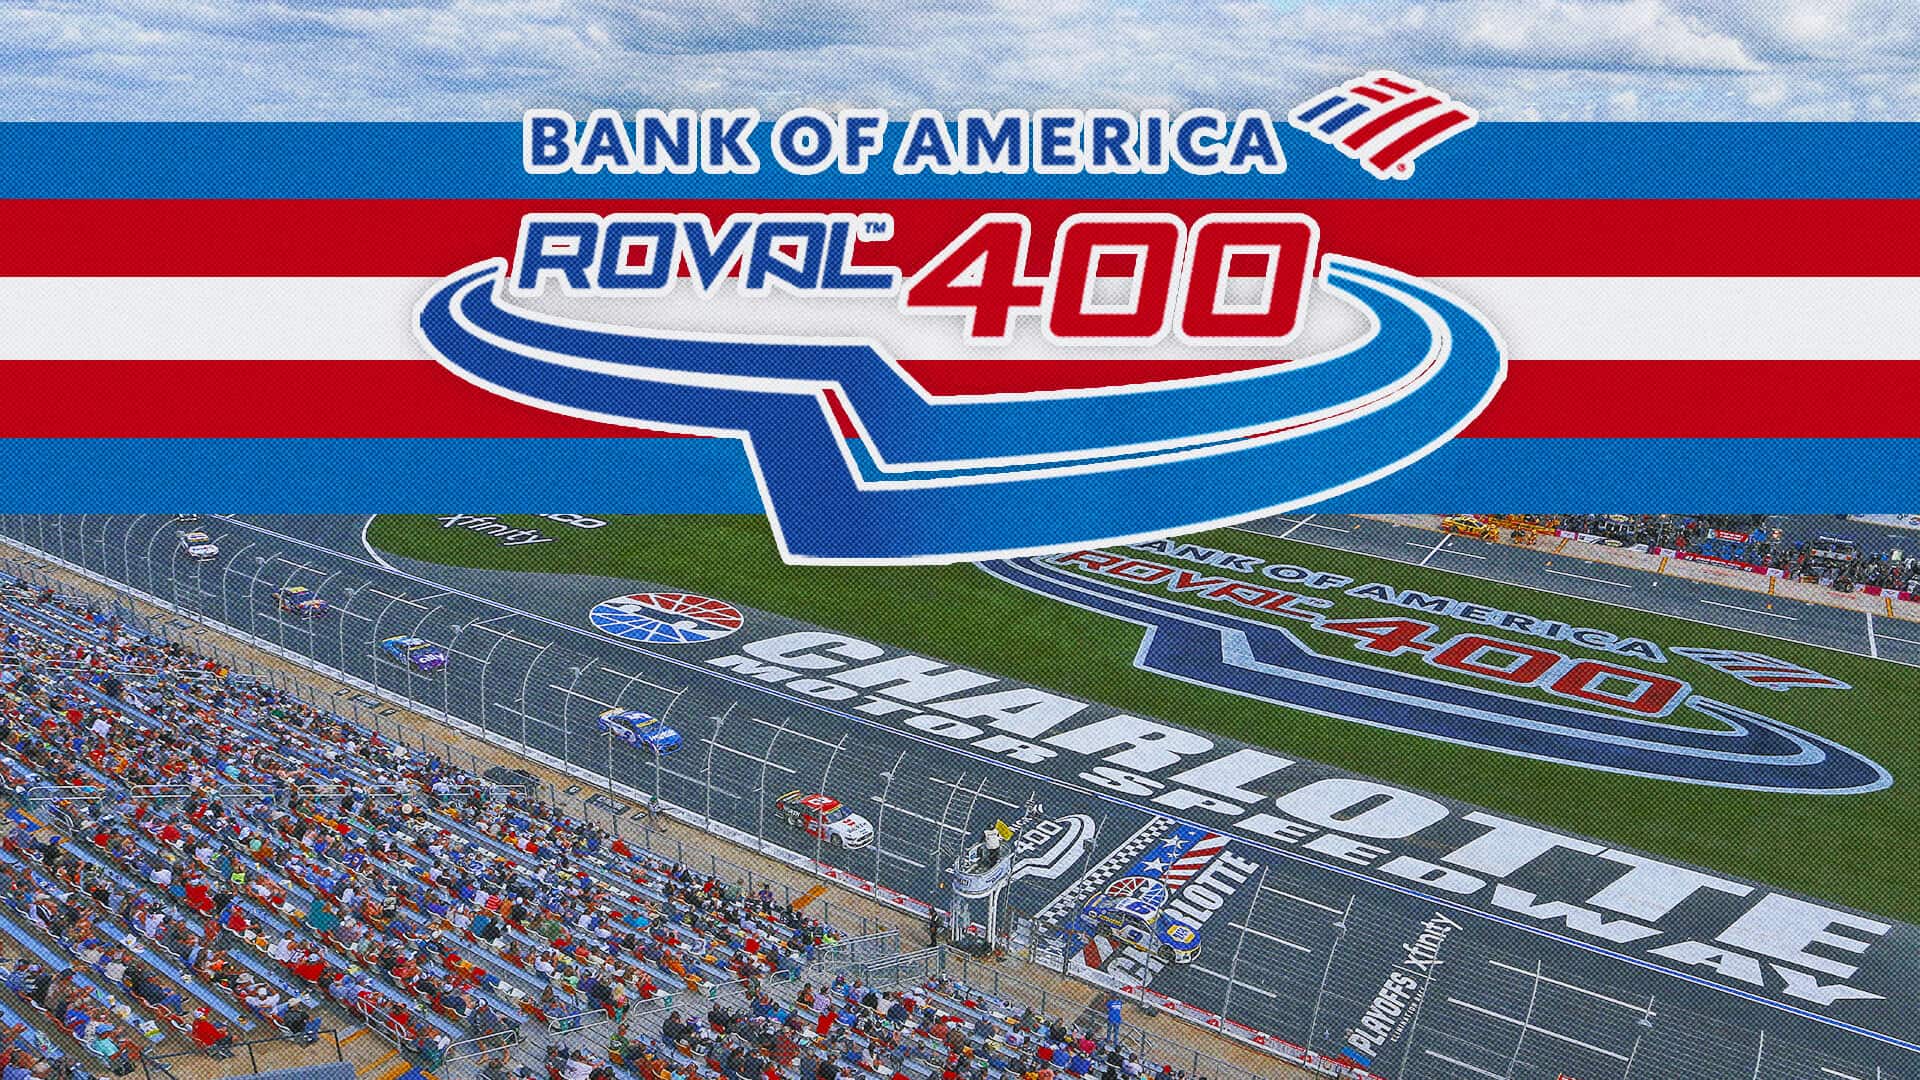 bank of america royal 400 event